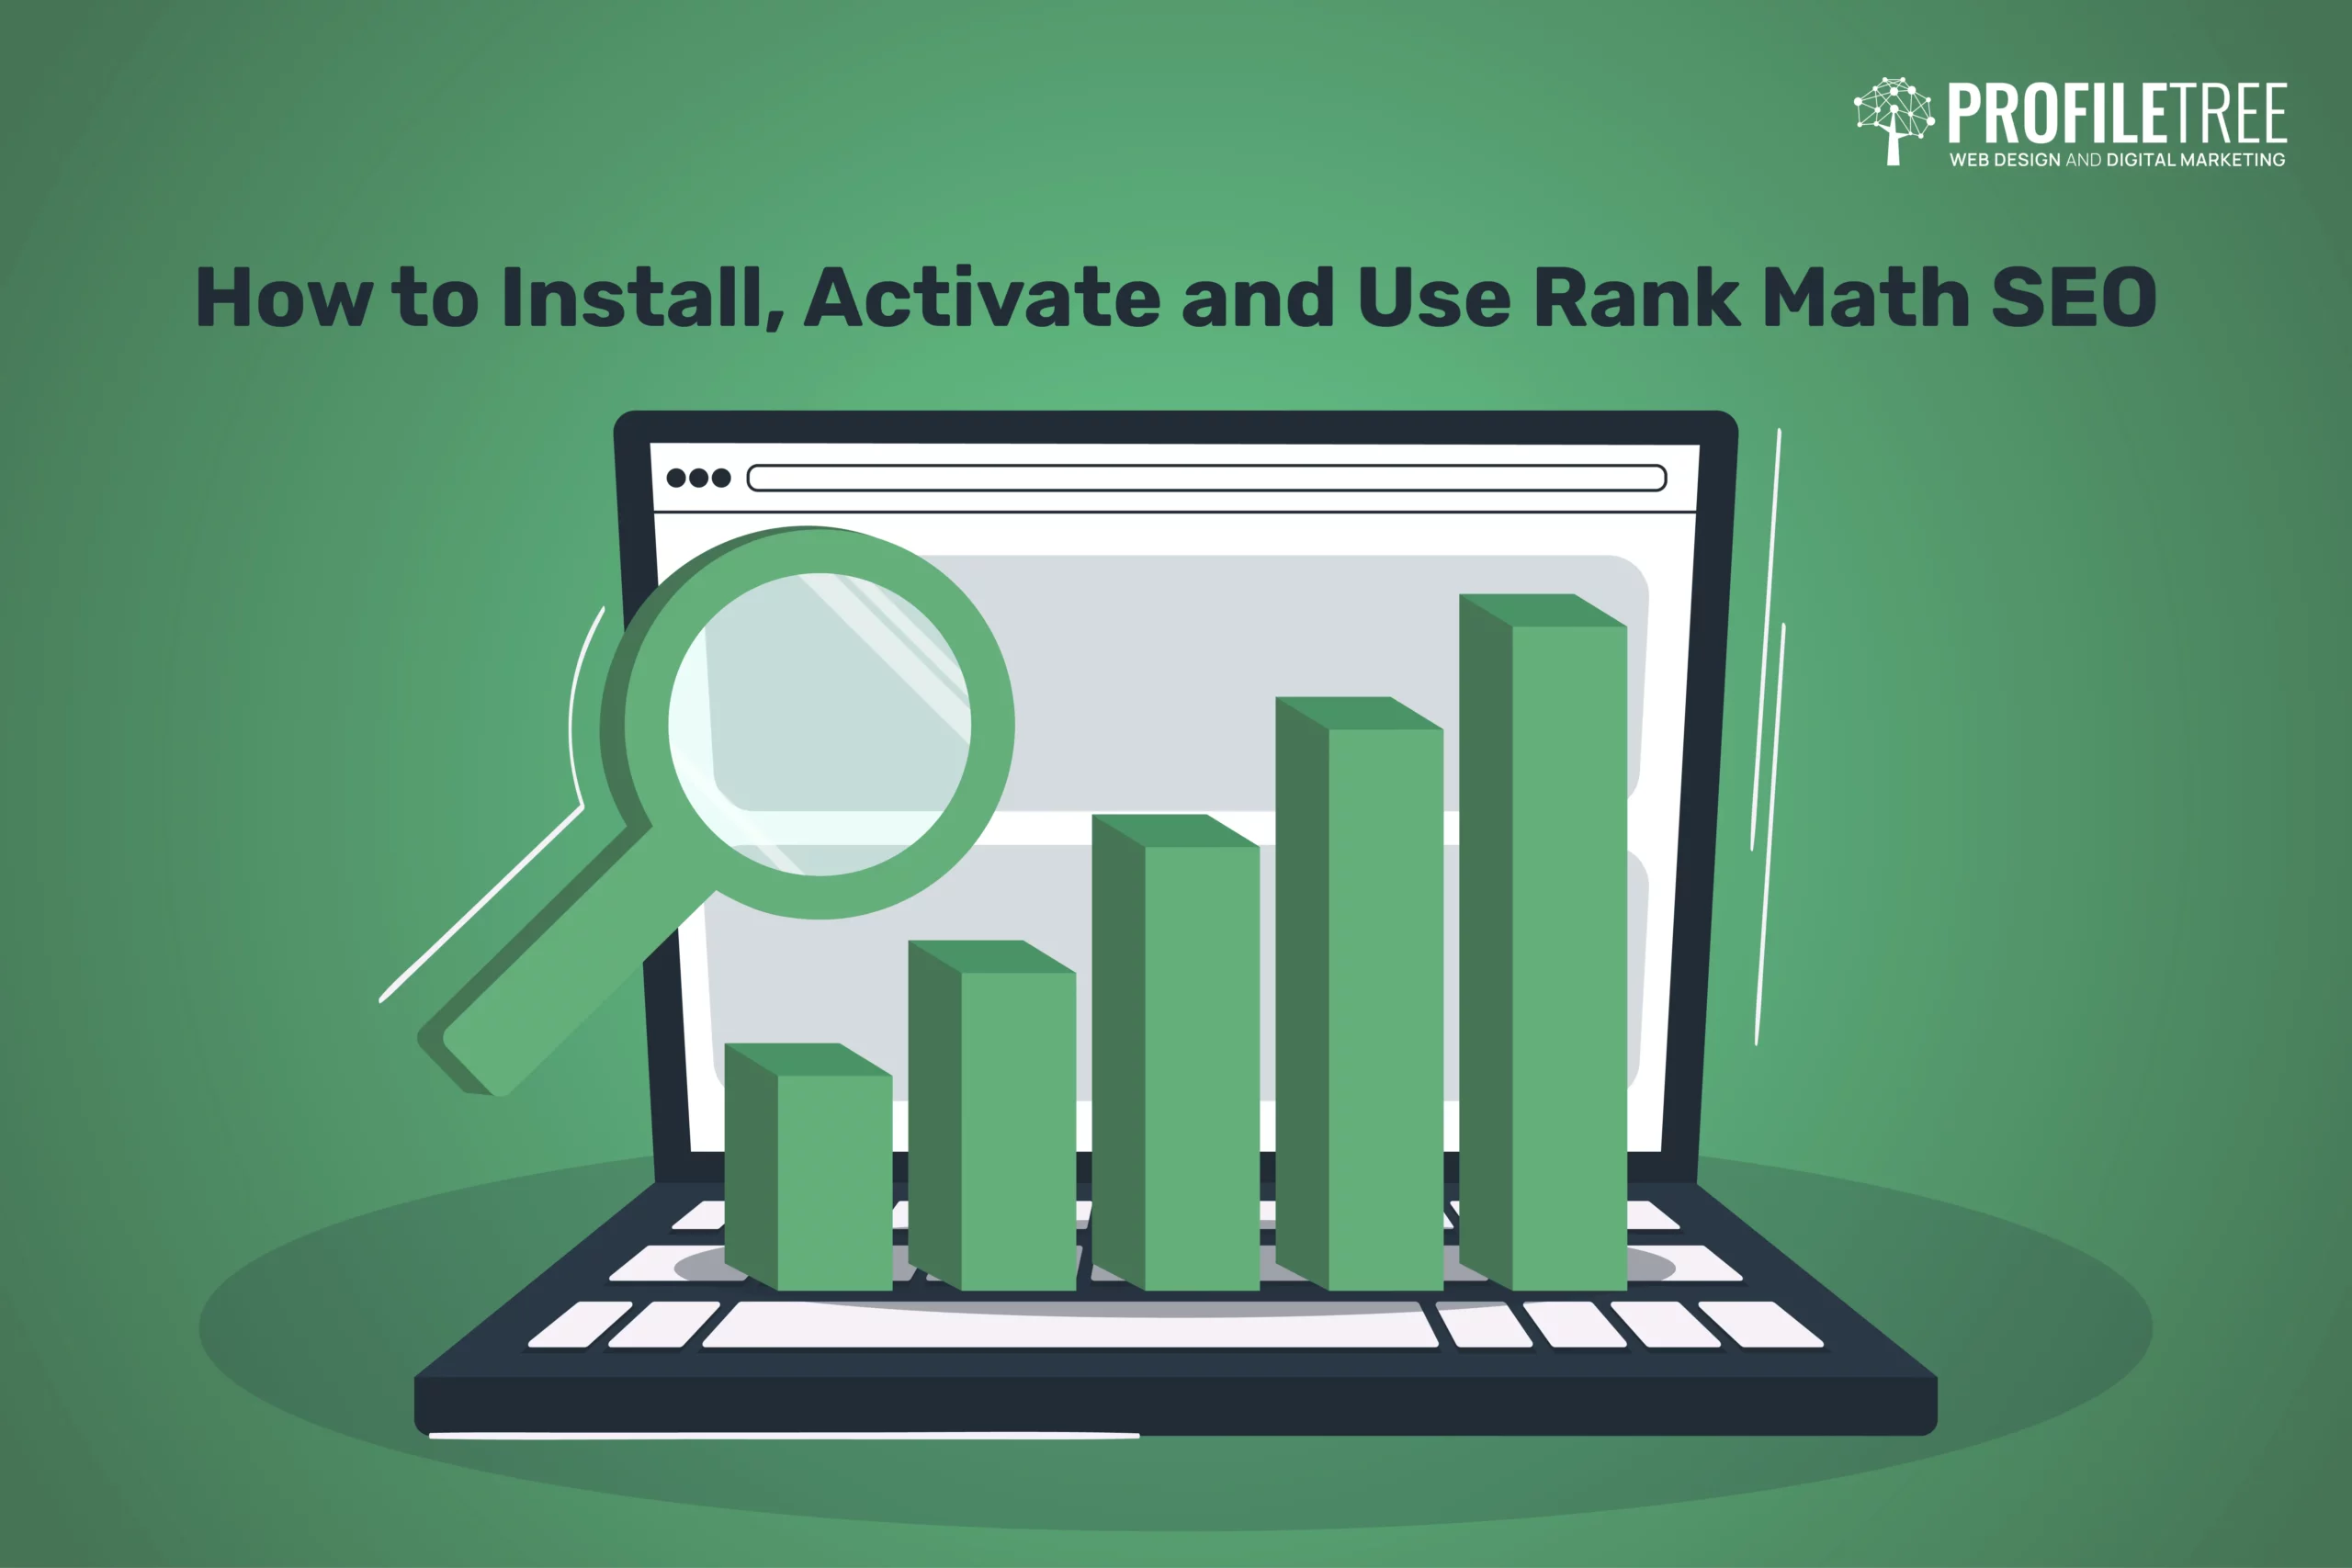 How to Install, Activate and Use Rank Math SEO